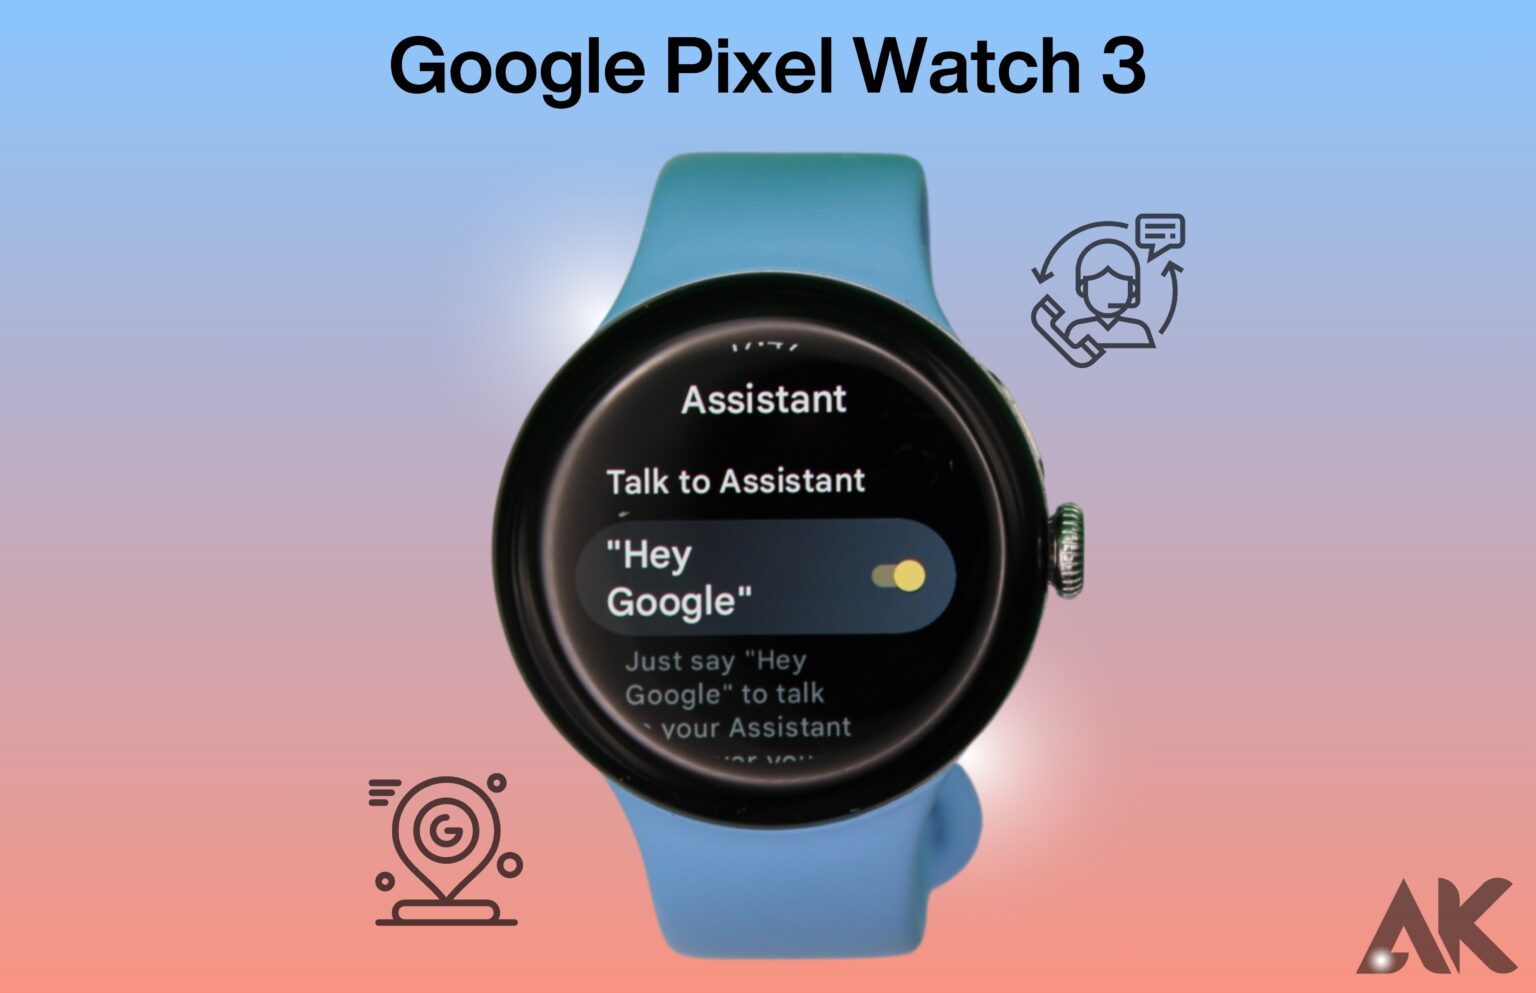 Your Wrist-Based Assistant: Does the Pixel Watch 3 Have Google Assistant?